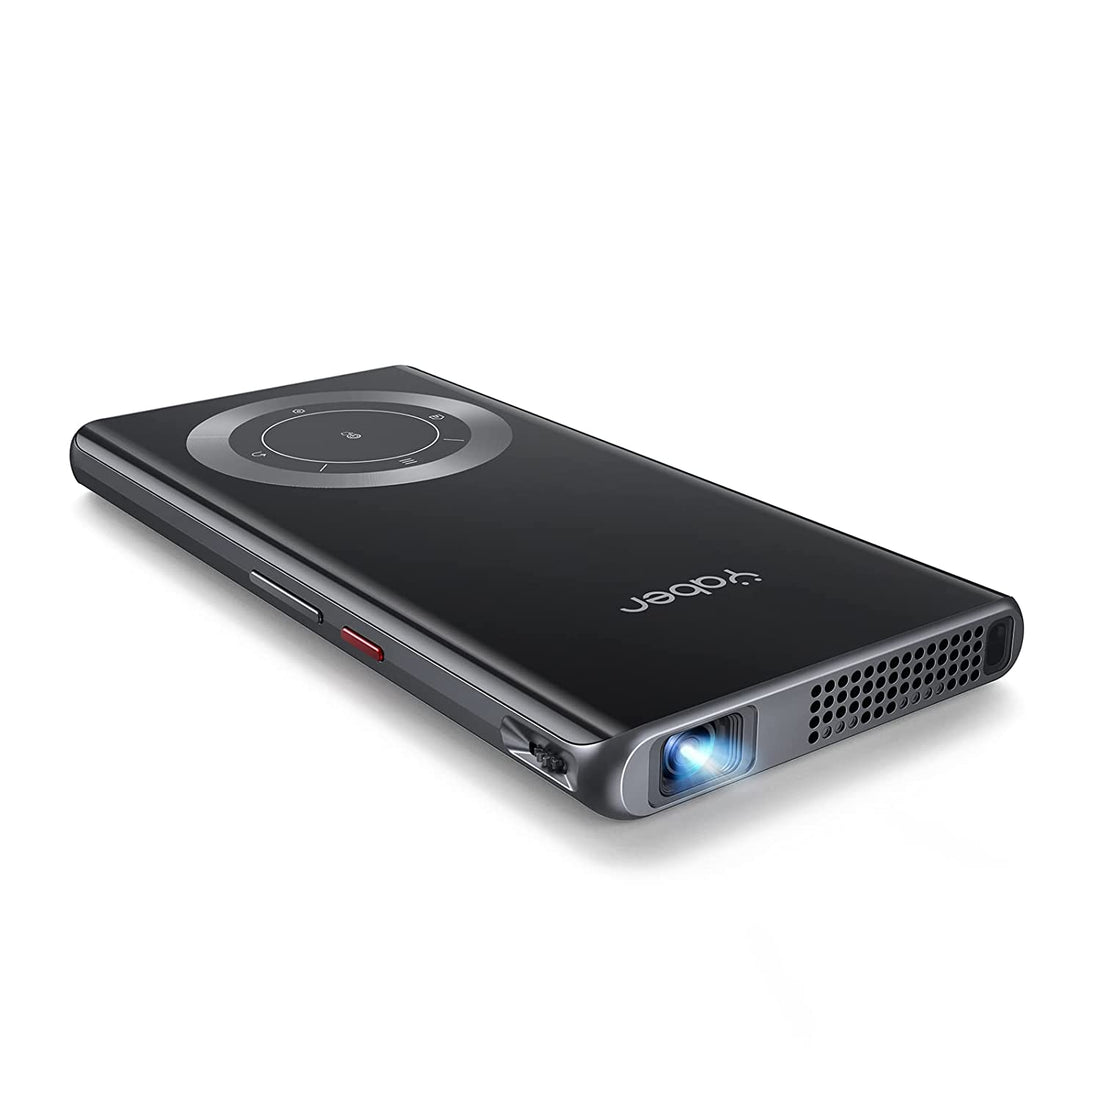 YABER V5 Mini Portable Projector - What Does $129 Get You??? 